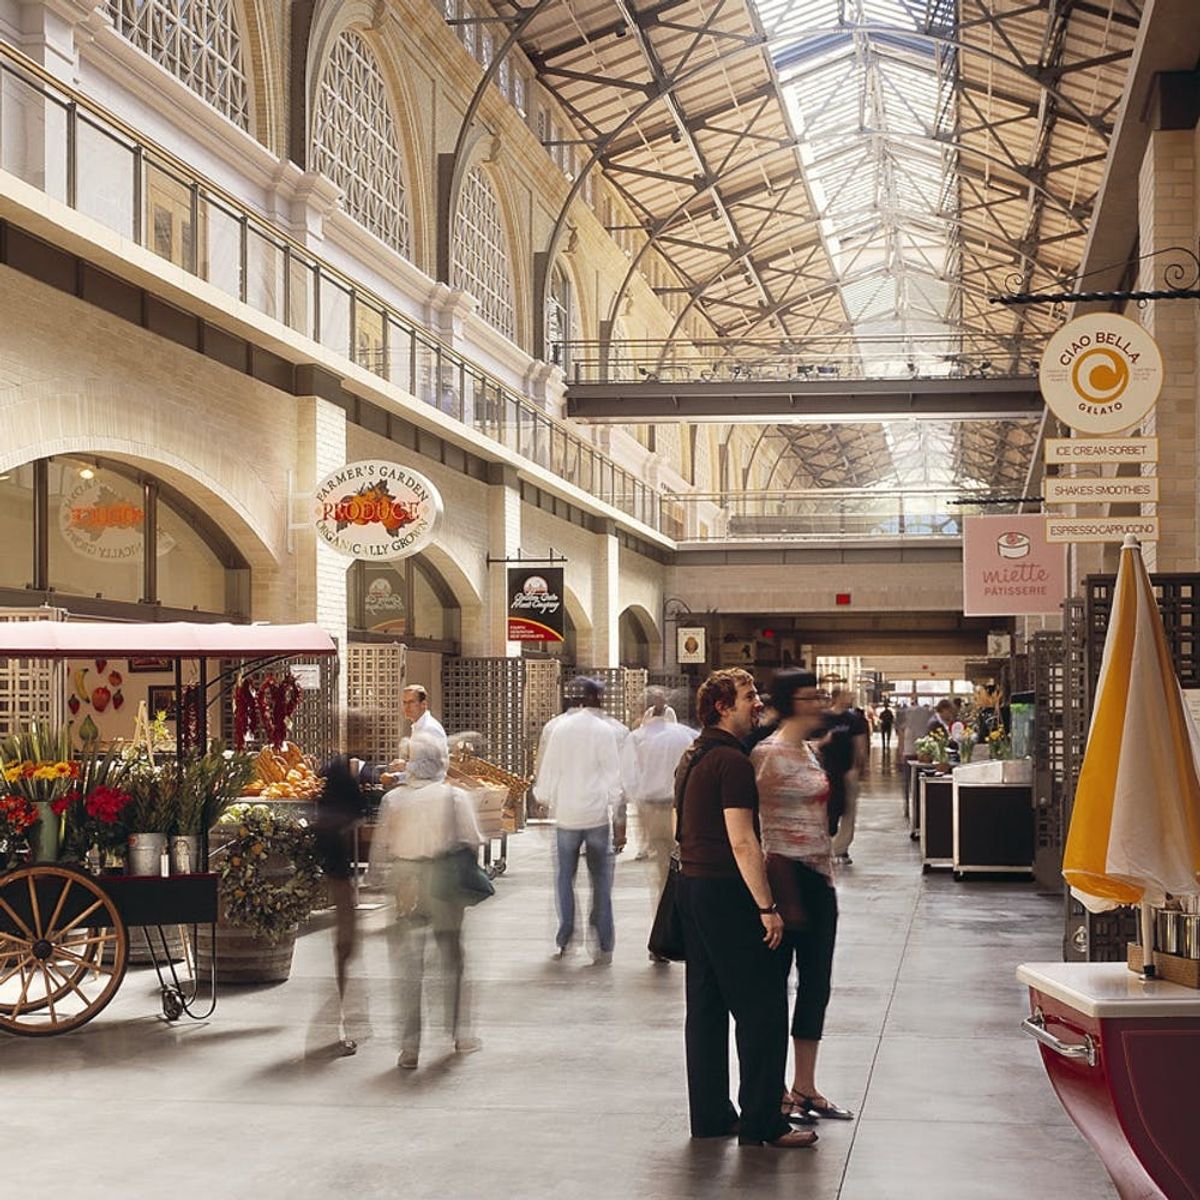 10 of the Most Incredible Food Halls + Markets Across America